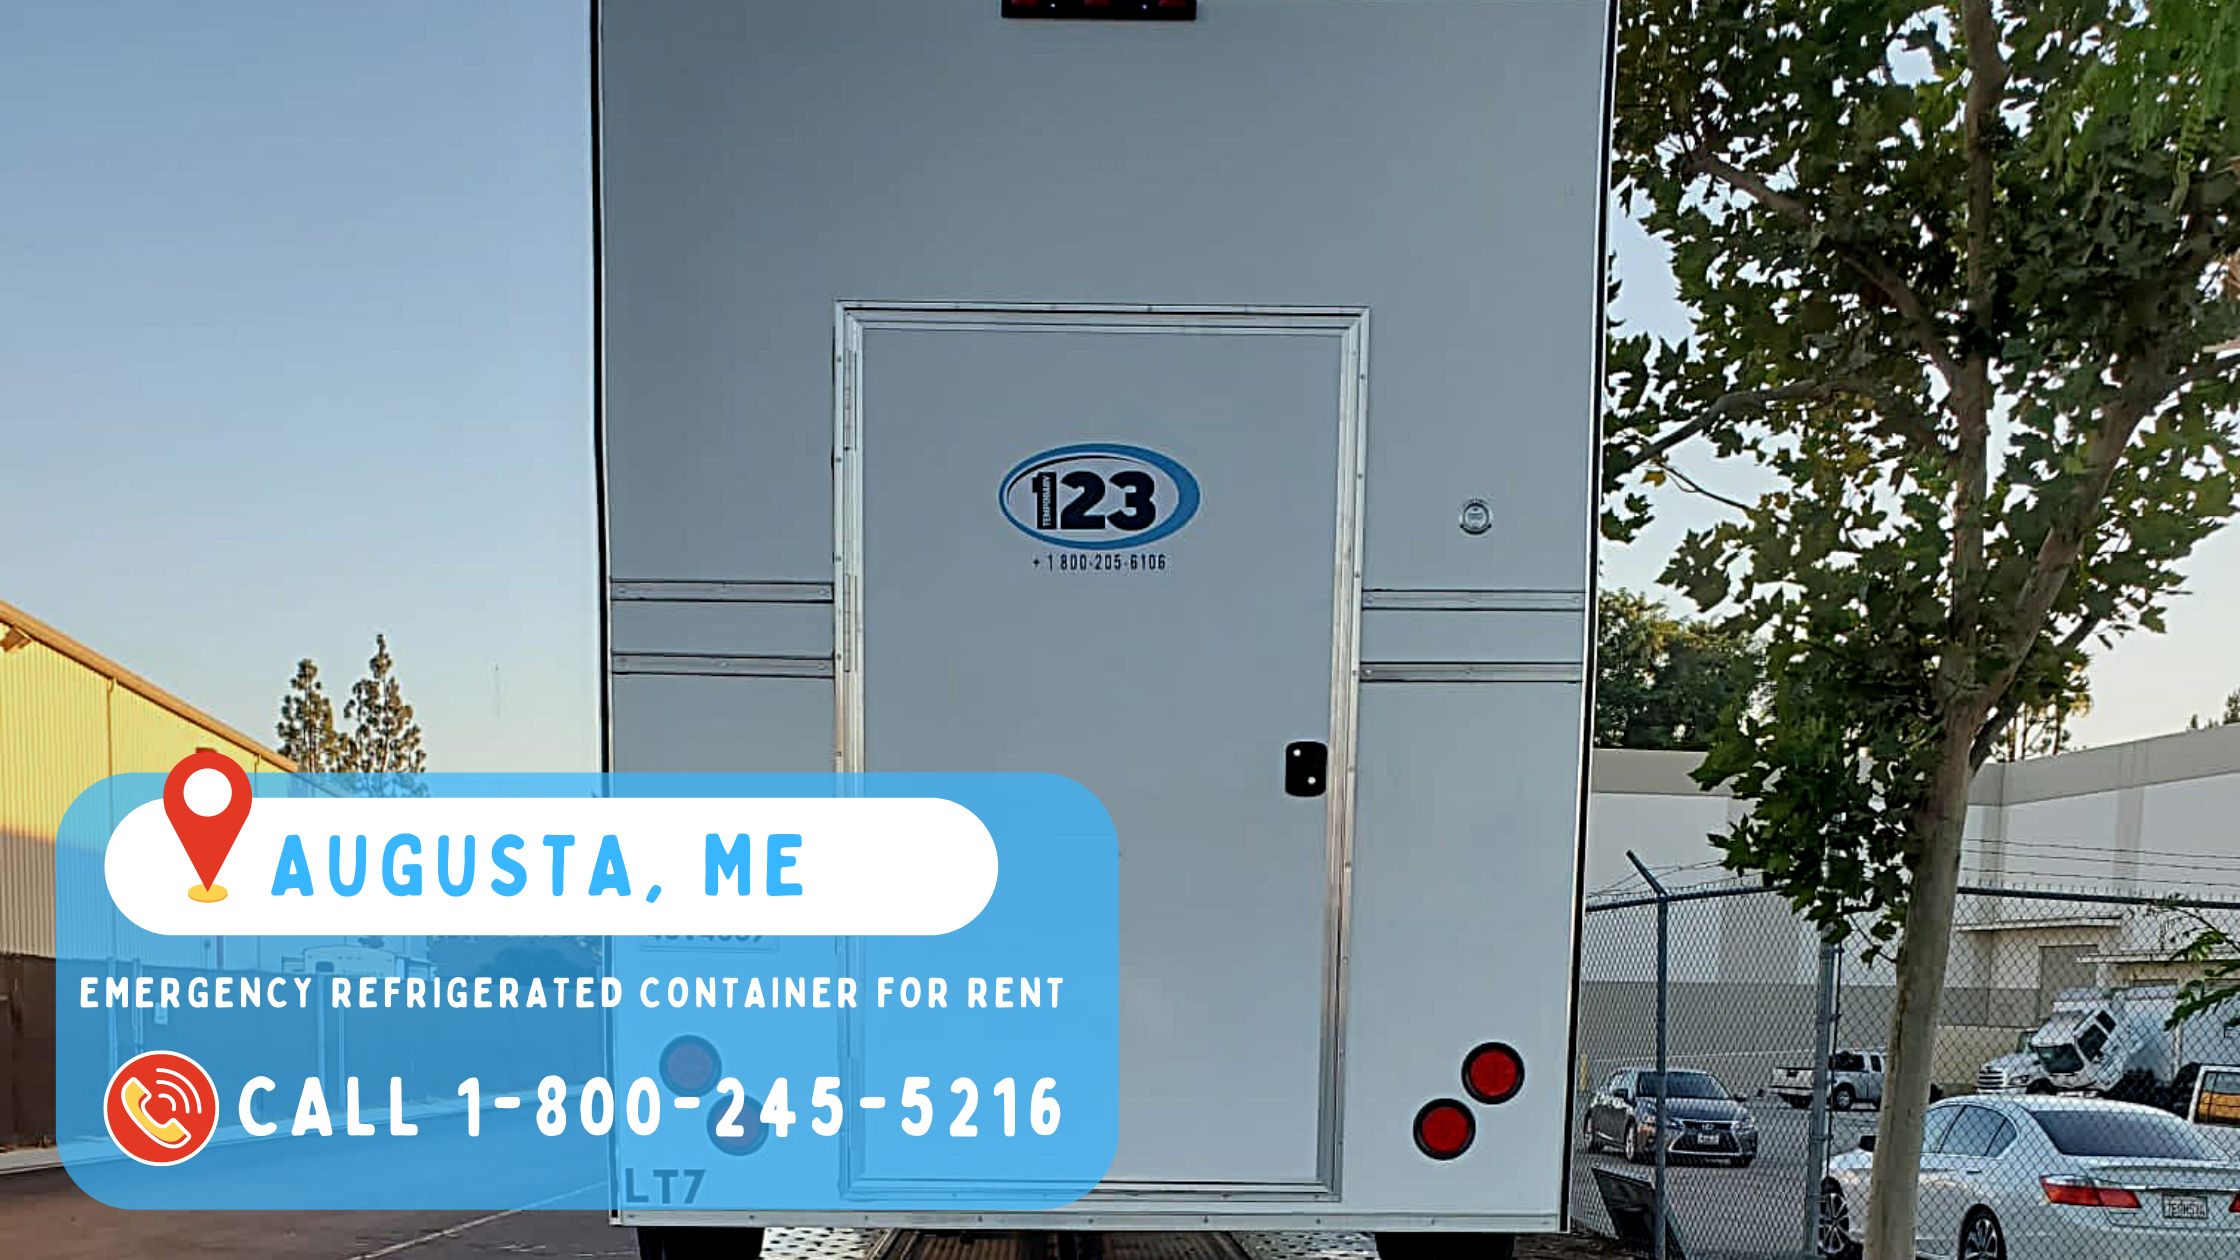 Emergency refrigerated container for rent in Augusta